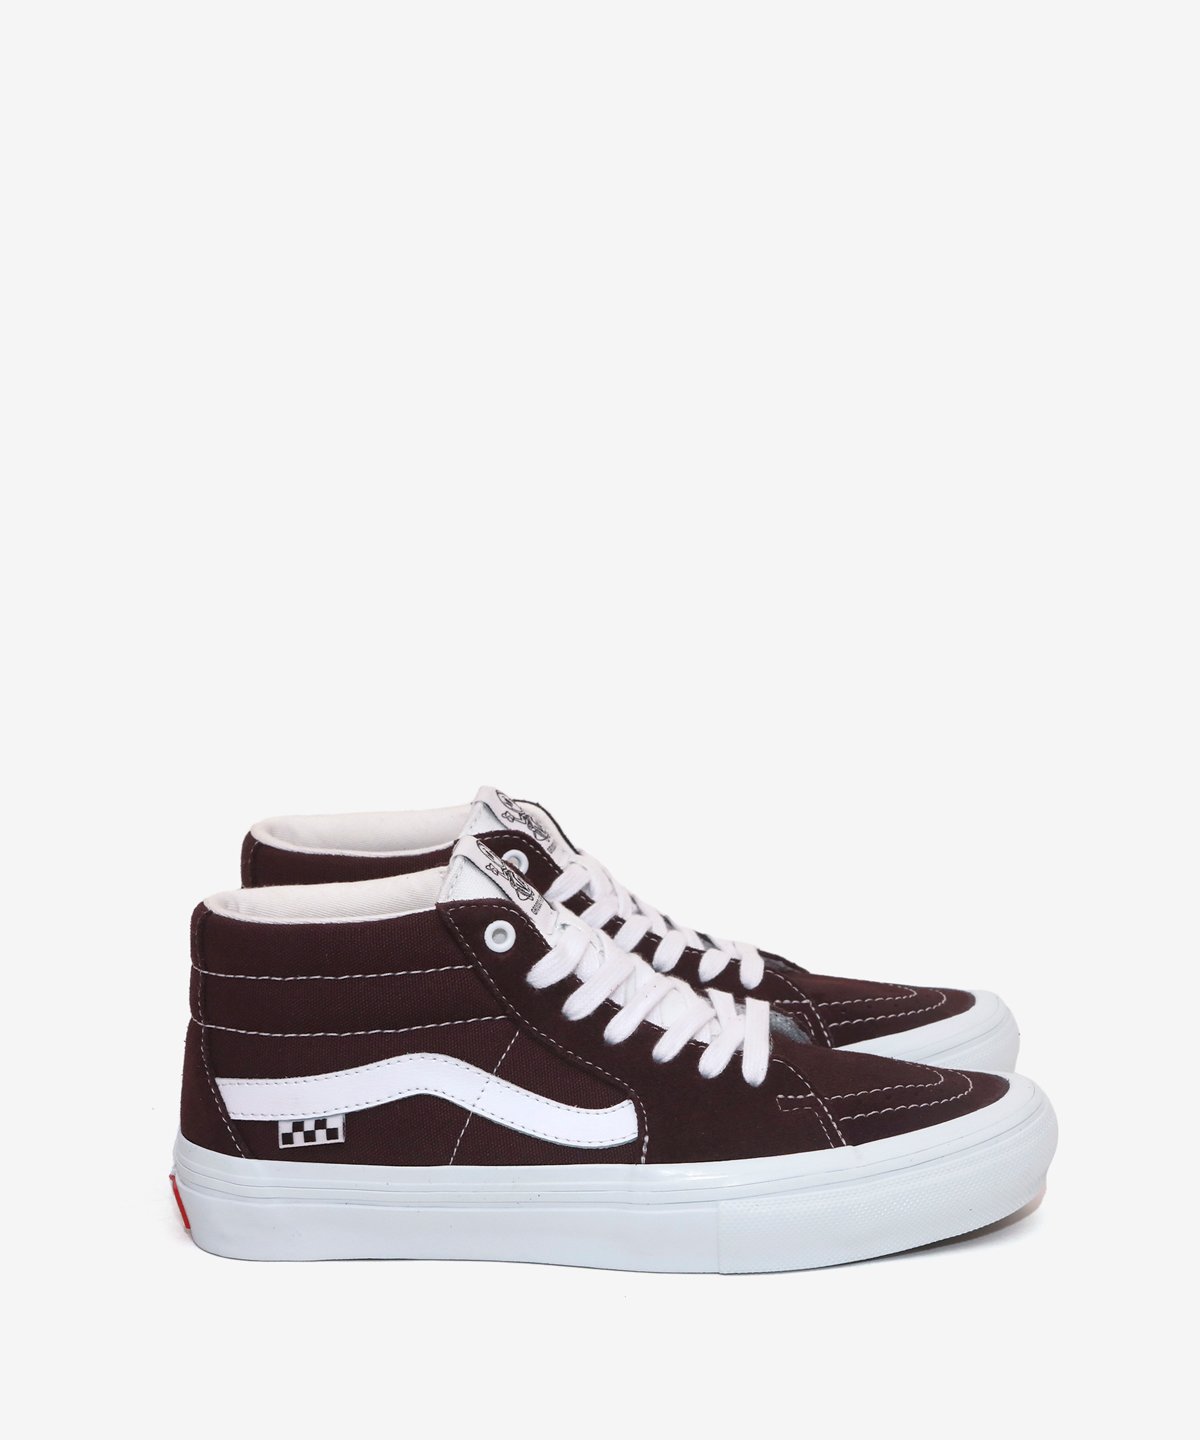 VANS_SKATE GROSSO MID (WRAPPED) :::WINE::: | SILO